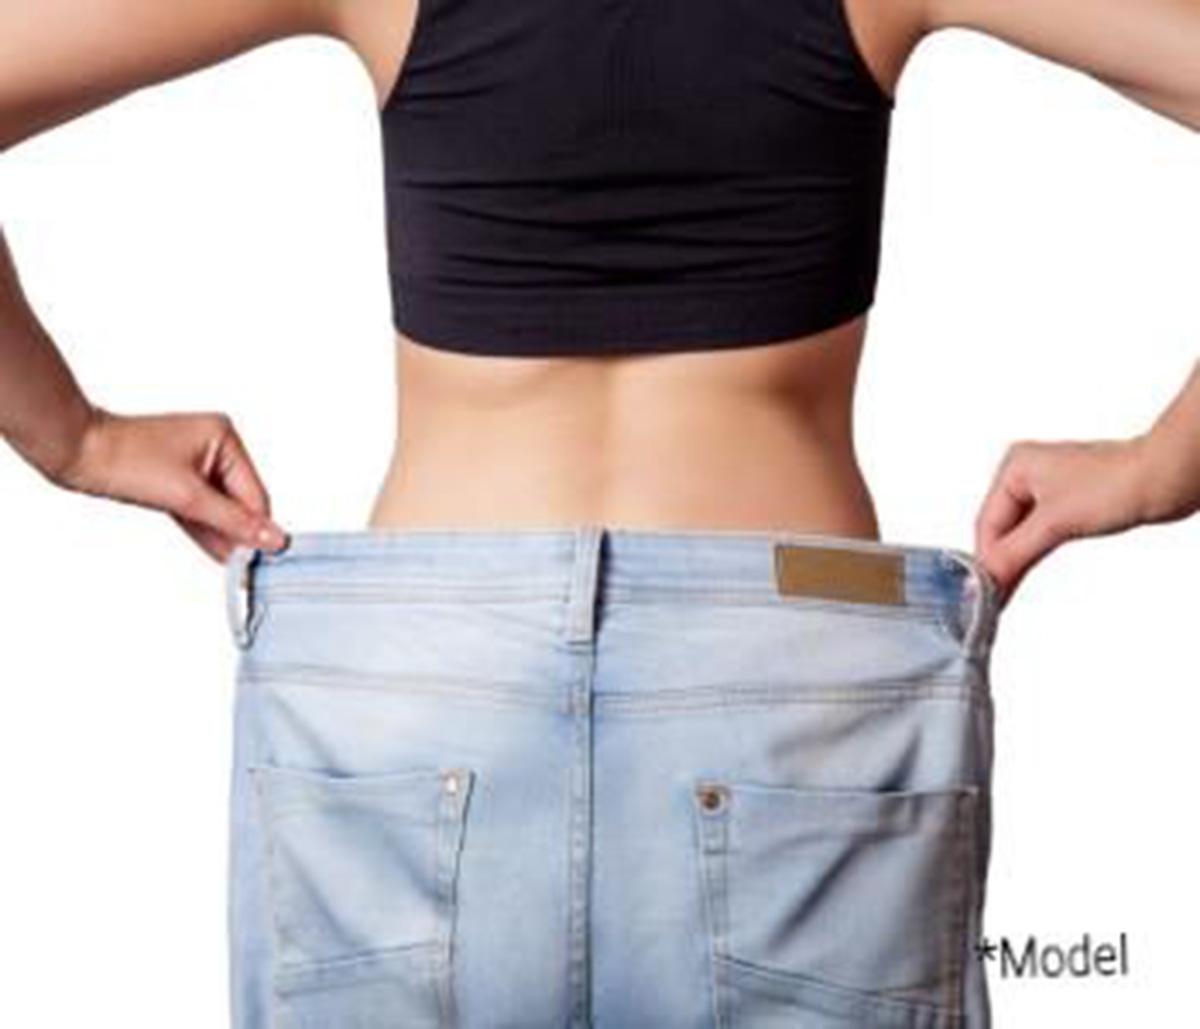 Extreme transformation resulting tummy tuck procedure from plastic surgeon in Beverly Hills